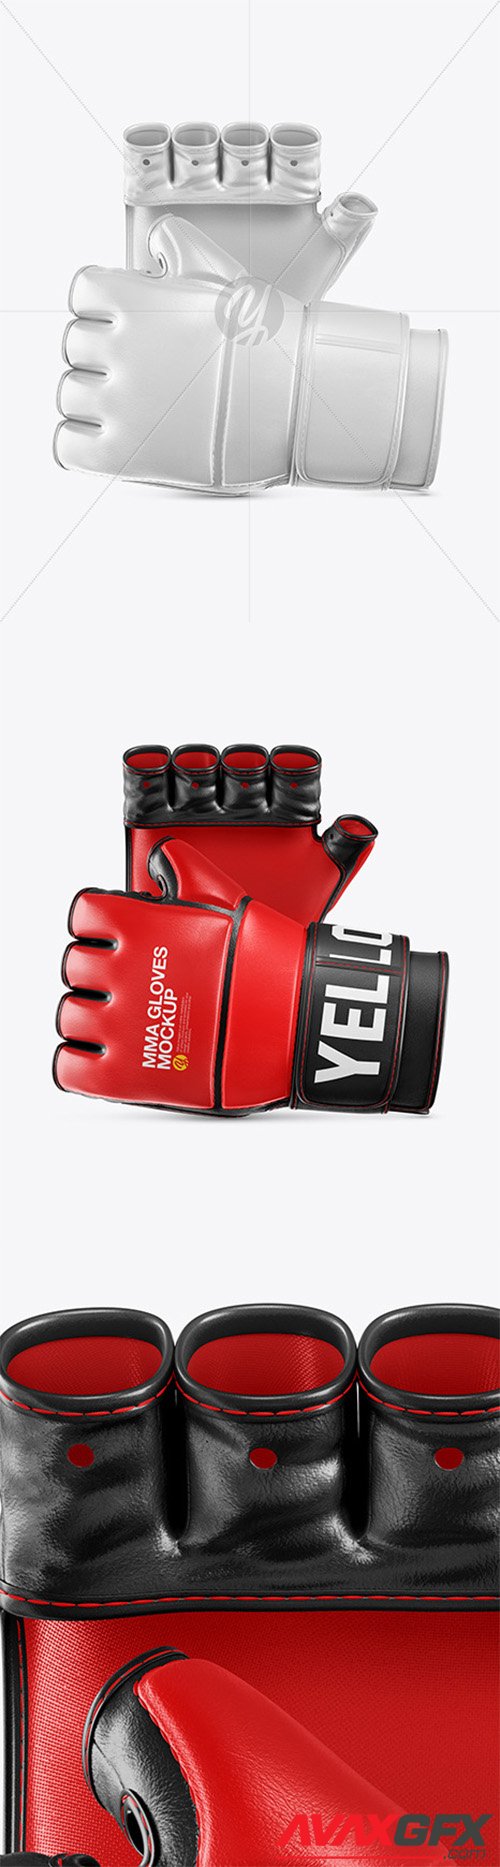 Download Boxing Gloves Mockup 21325 » AVAXGFX - All Downloads that You Need in One Place! Graphic from ...